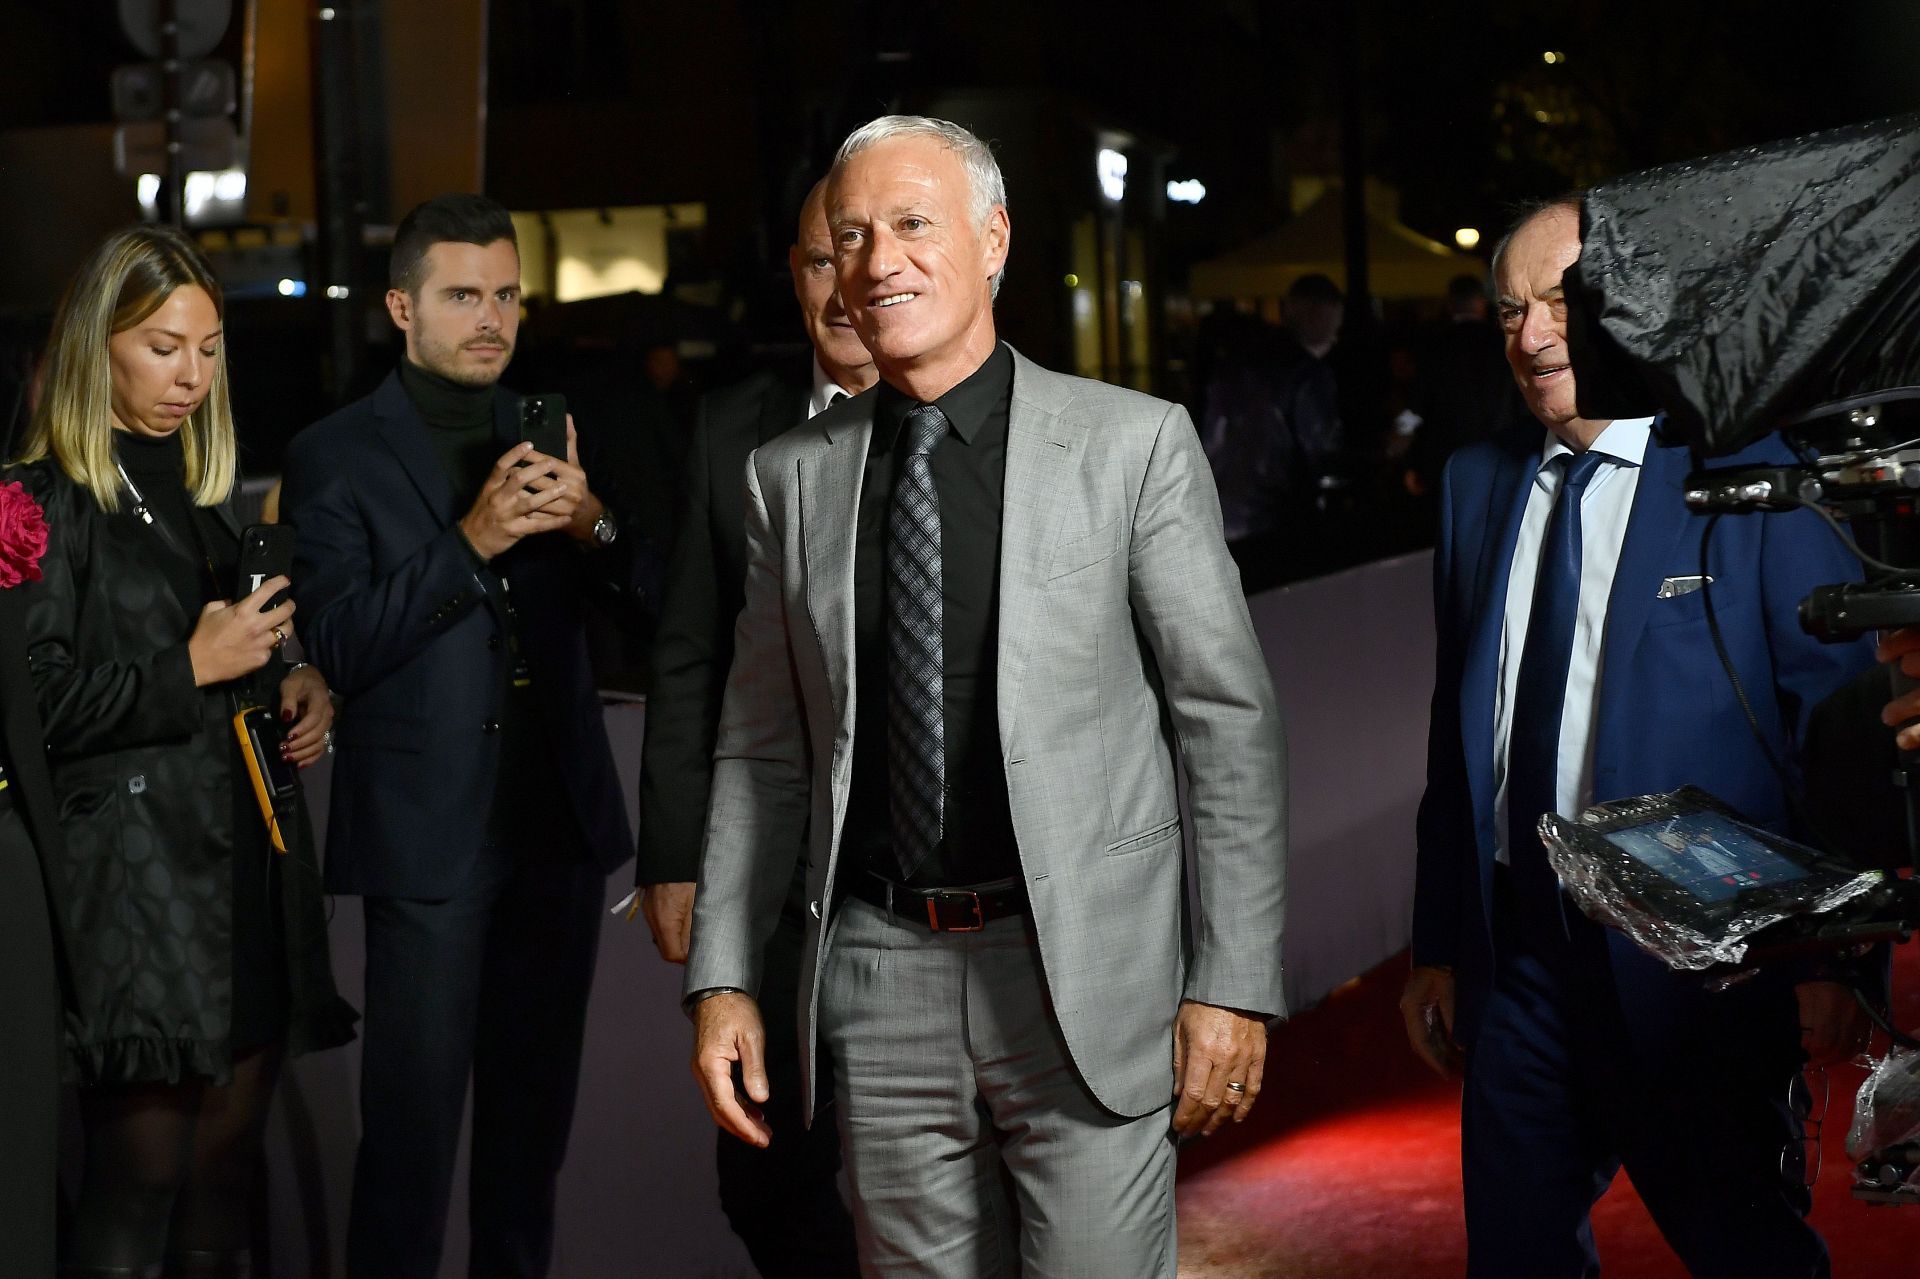 Didier Deschamps will hope to defend the title at 2022 FIFA World Cup